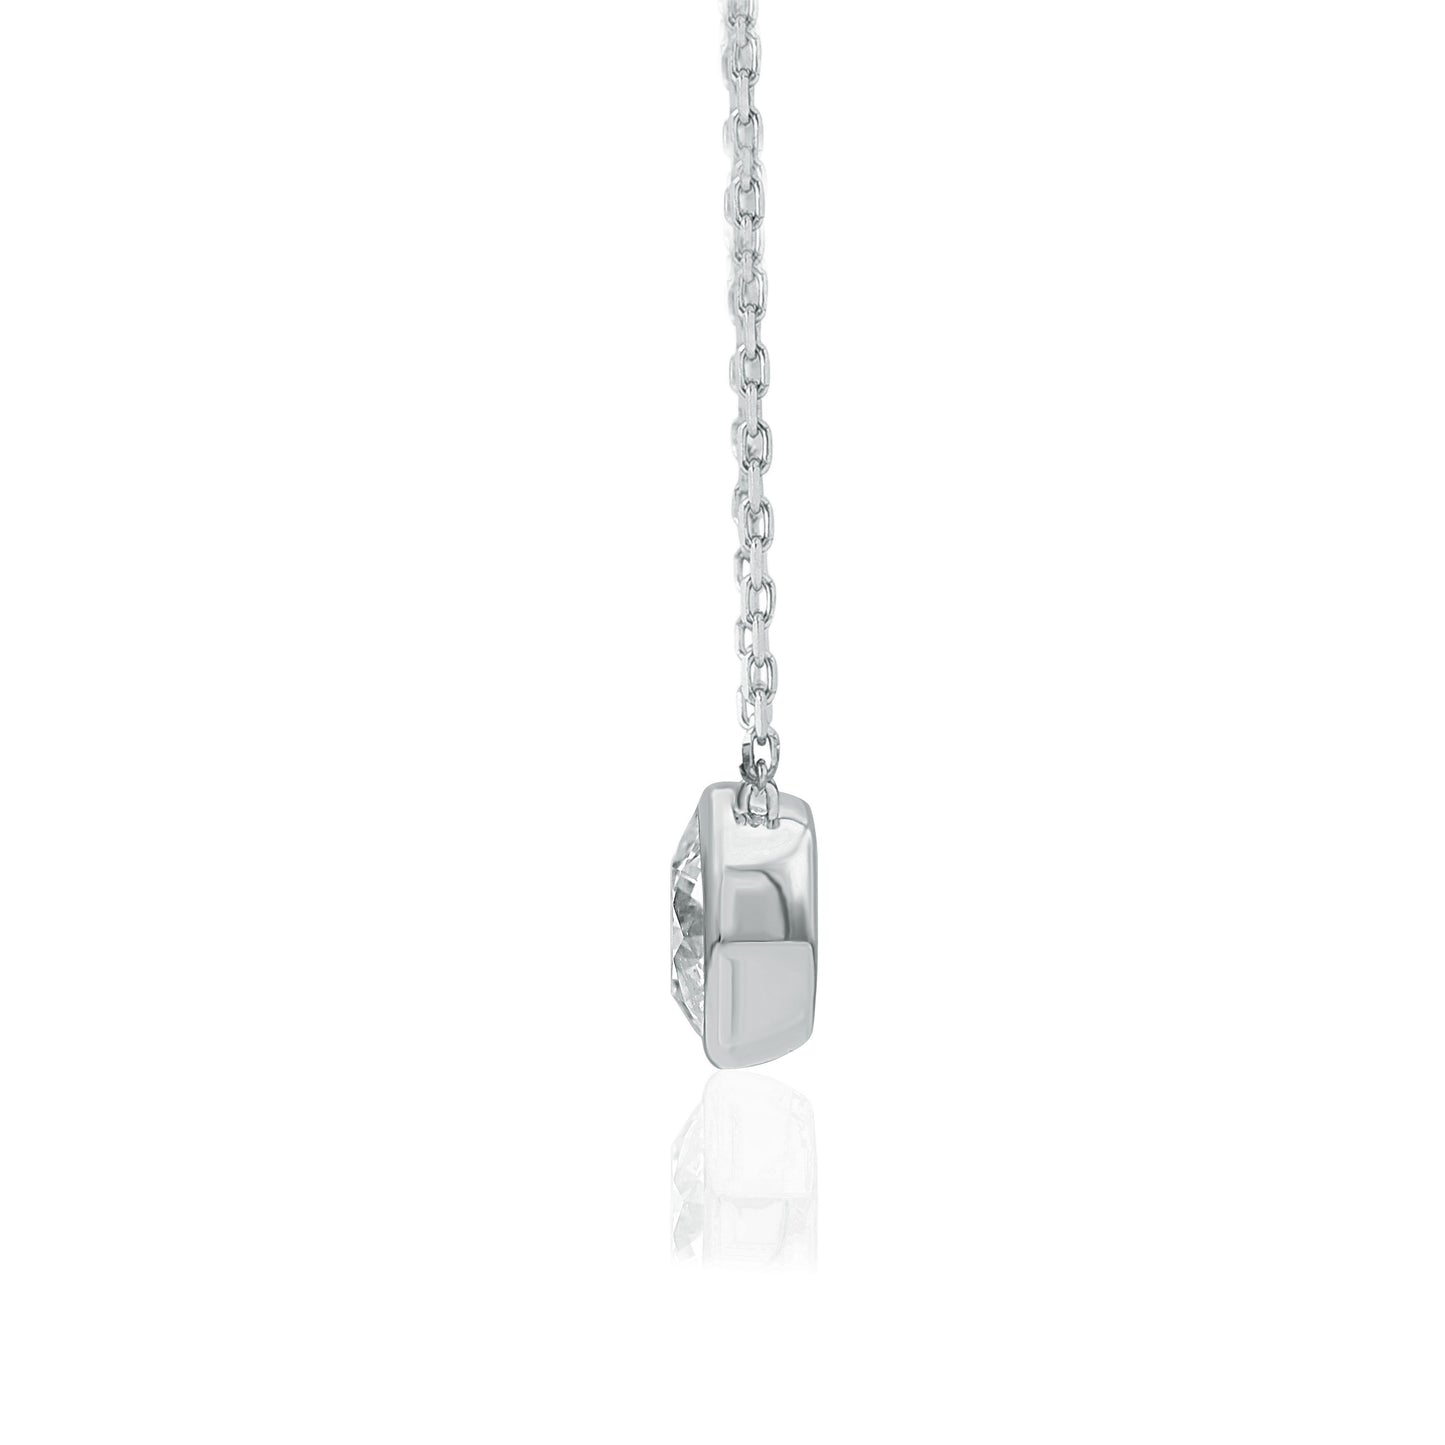 0.40 Carat Natural Diamond Halo Pendant Necklace in 10K Gold